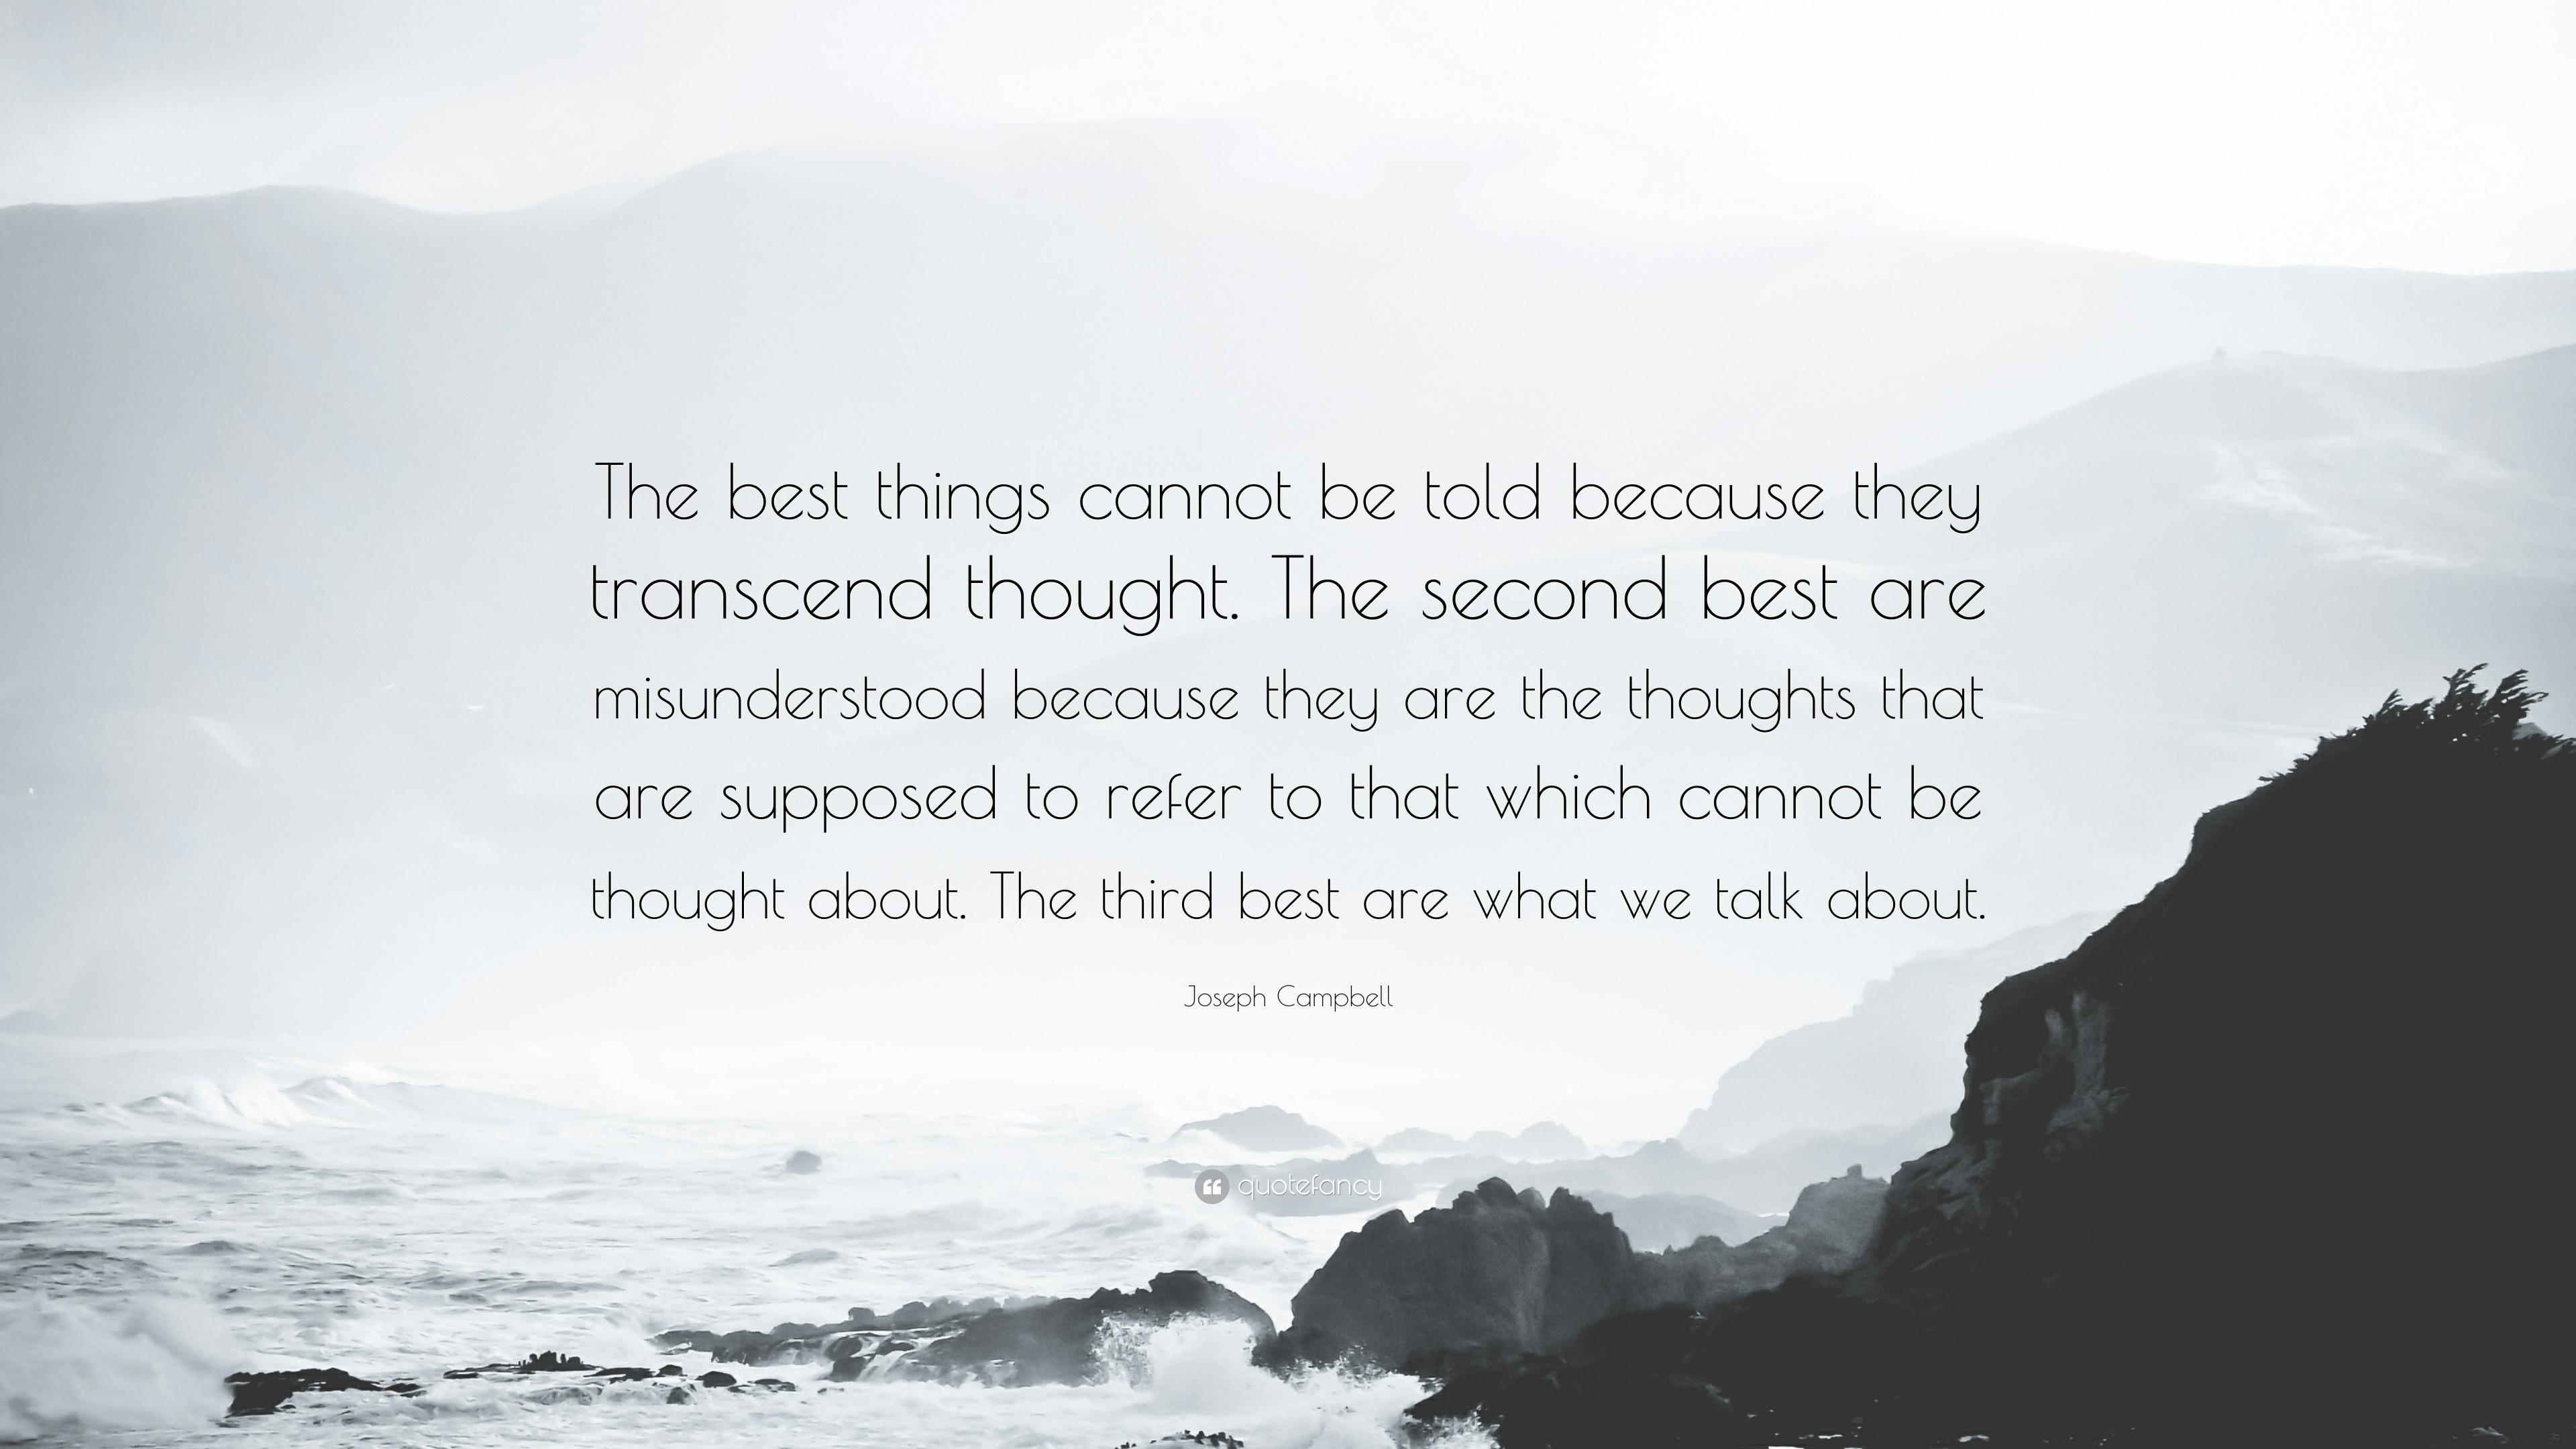 Joseph Campbell Quote: “The best things cannot be told because they ...